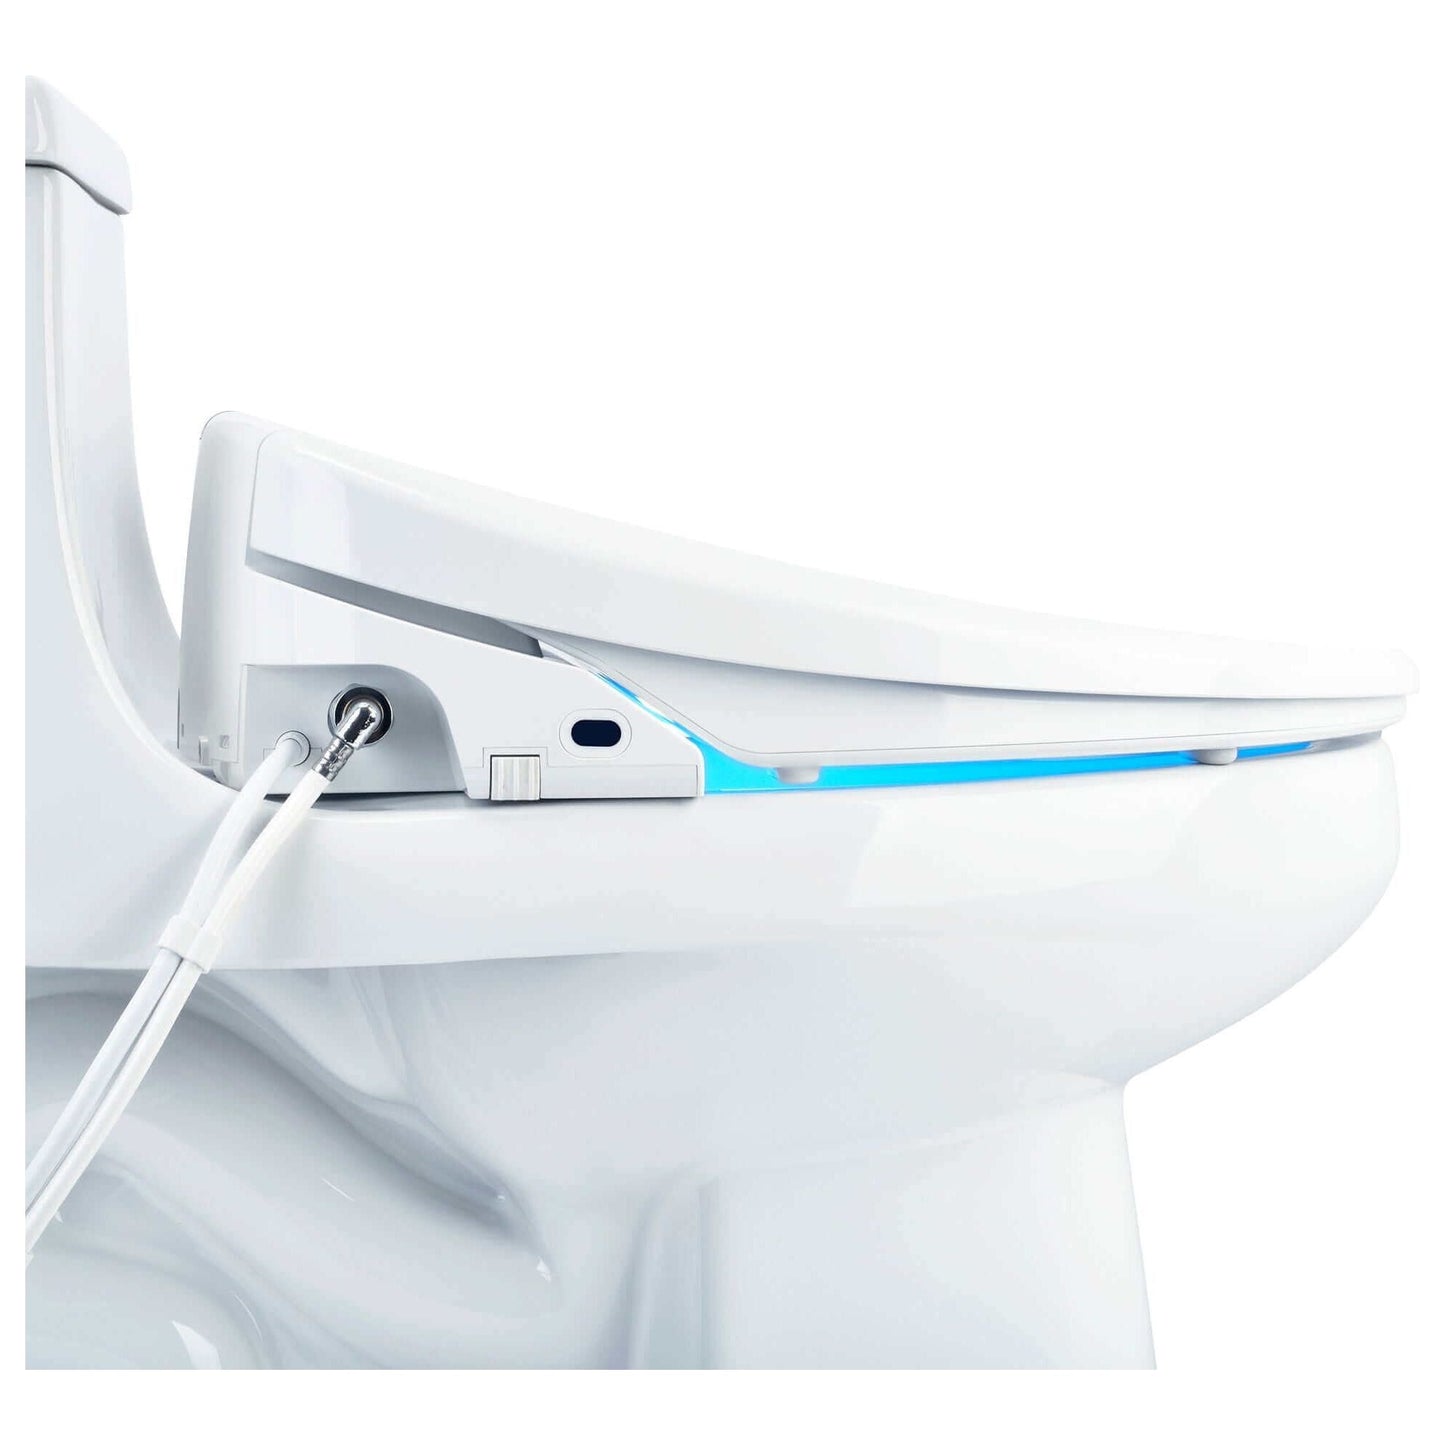 Swash 1400 Bidet Seat - side view attached to a tollet